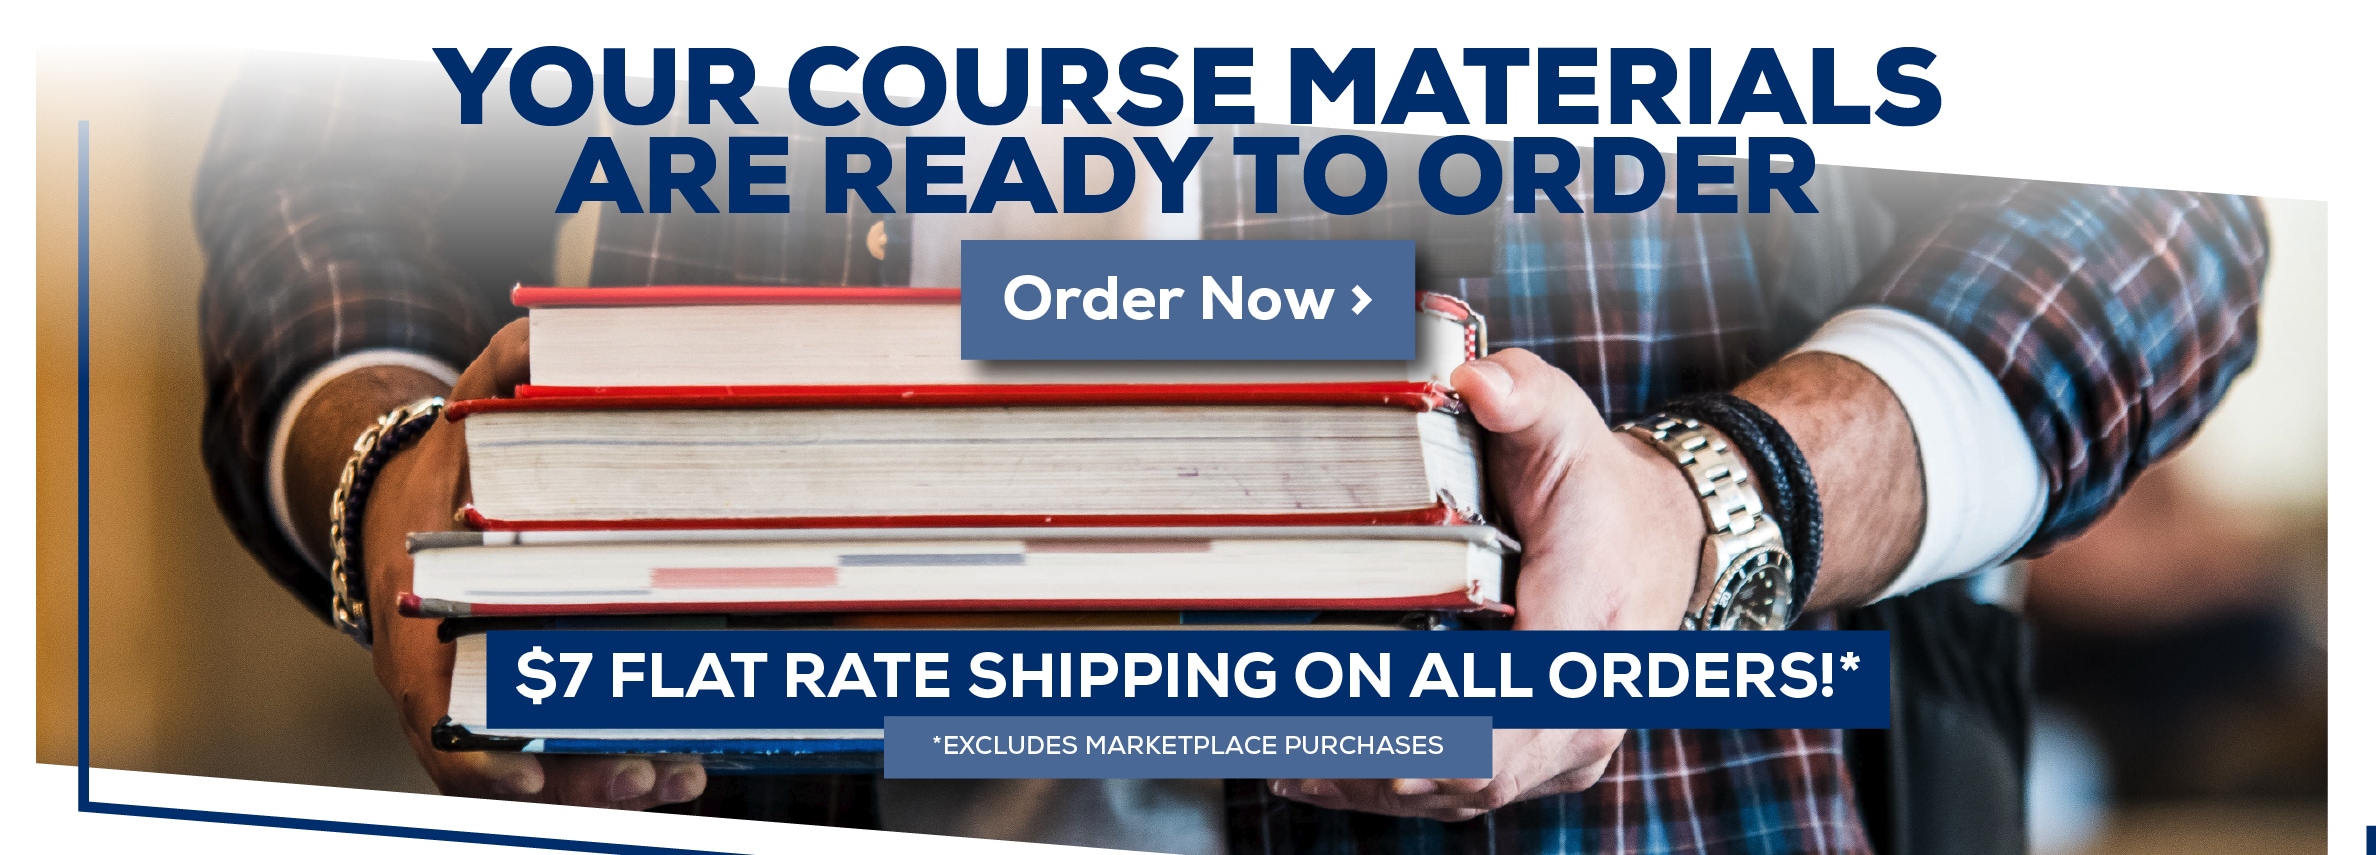 Your Course Materials are Ready to Order. Order Now. $7 Flat Rate Shipping on All Orders! *Excludes marketplace purchases.